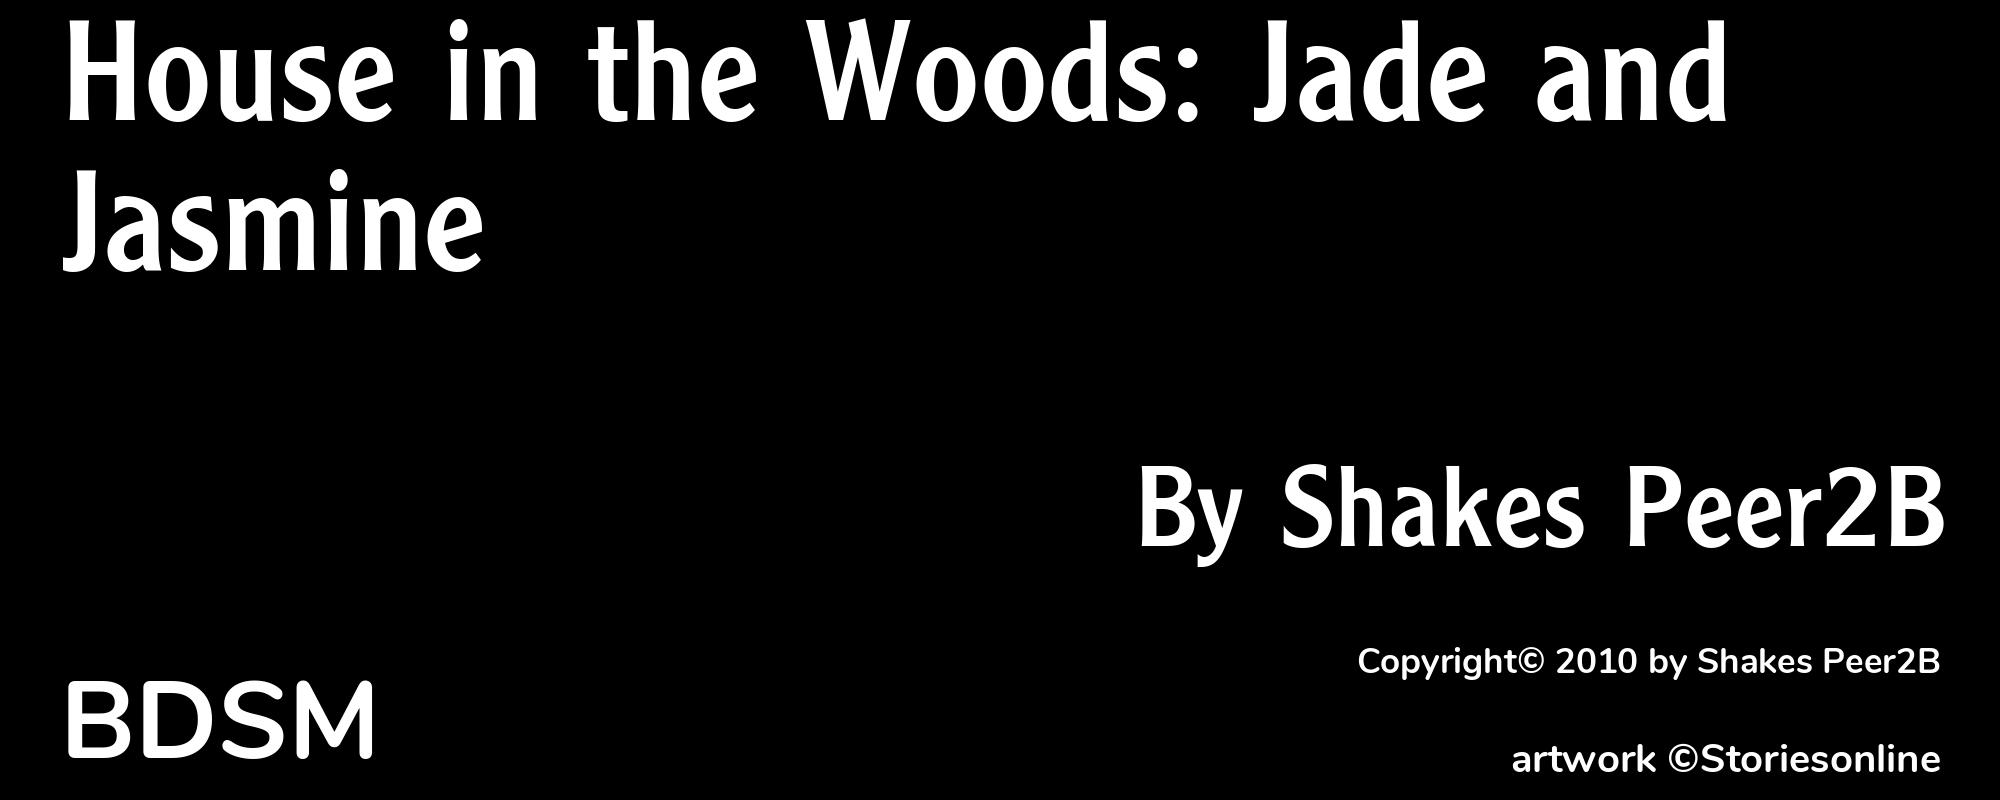 House in the Woods: Jade and Jasmine - Cover